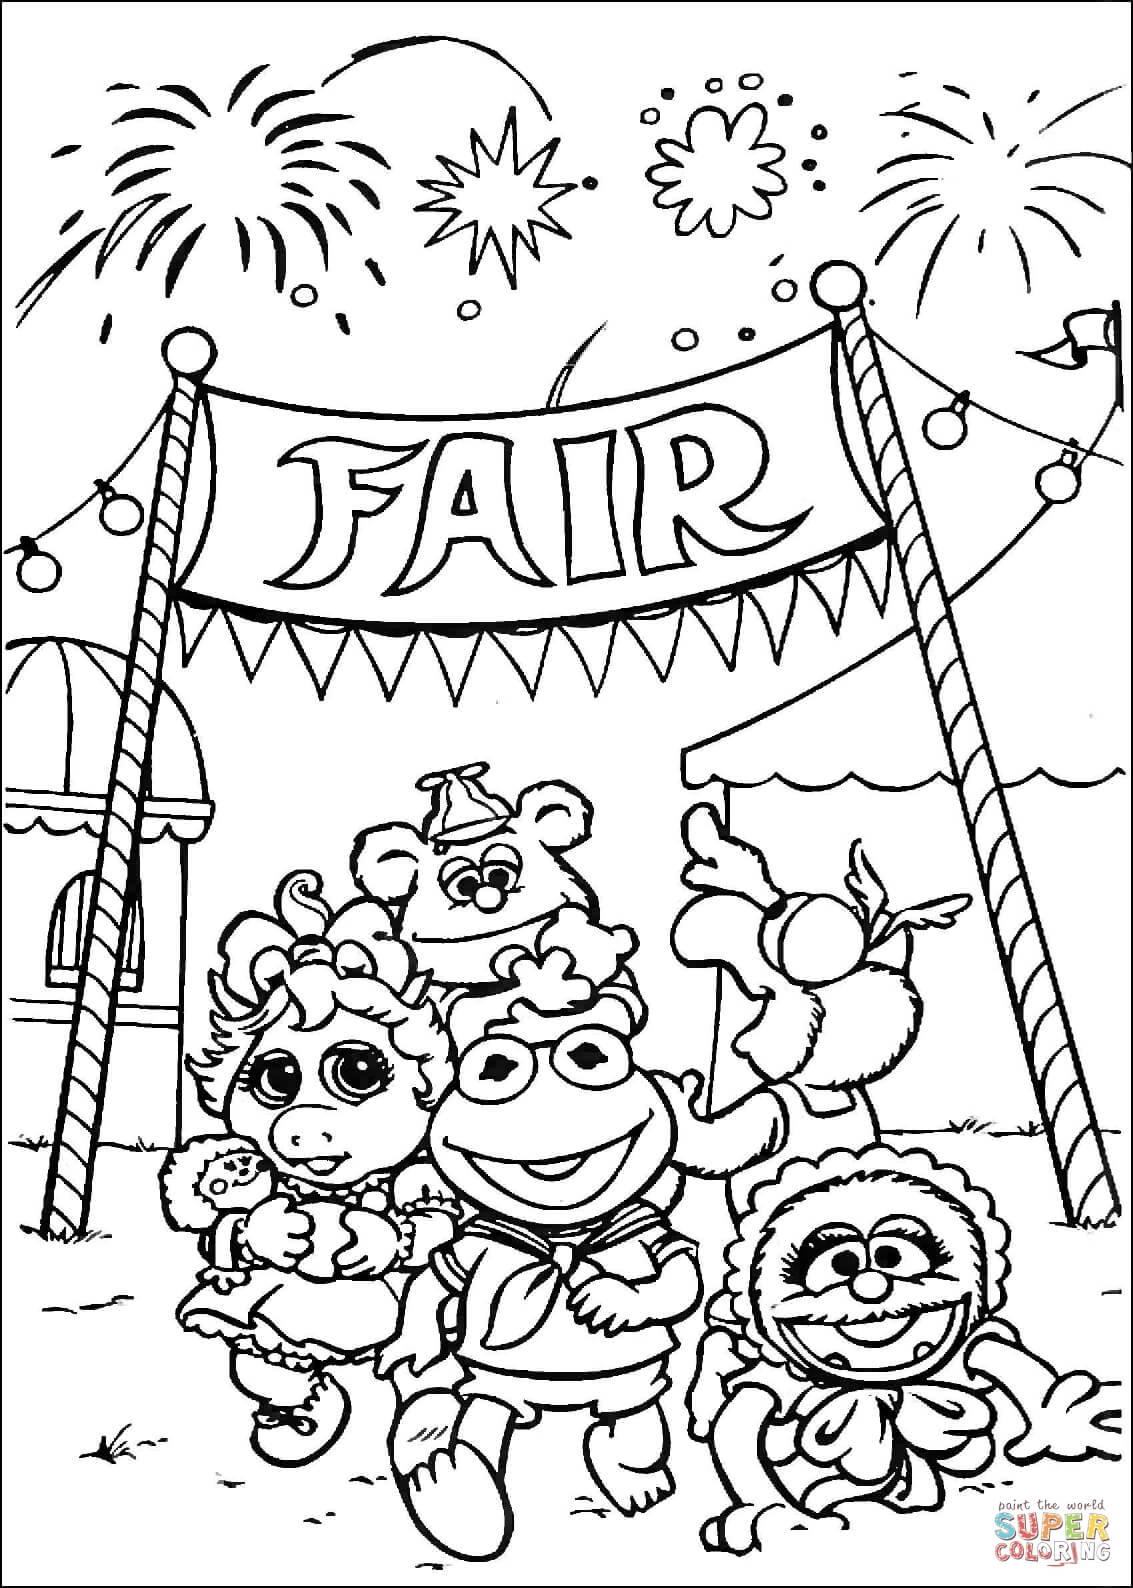 Muppet Babies Goes To Fair Market coloring page | Free Printable ...